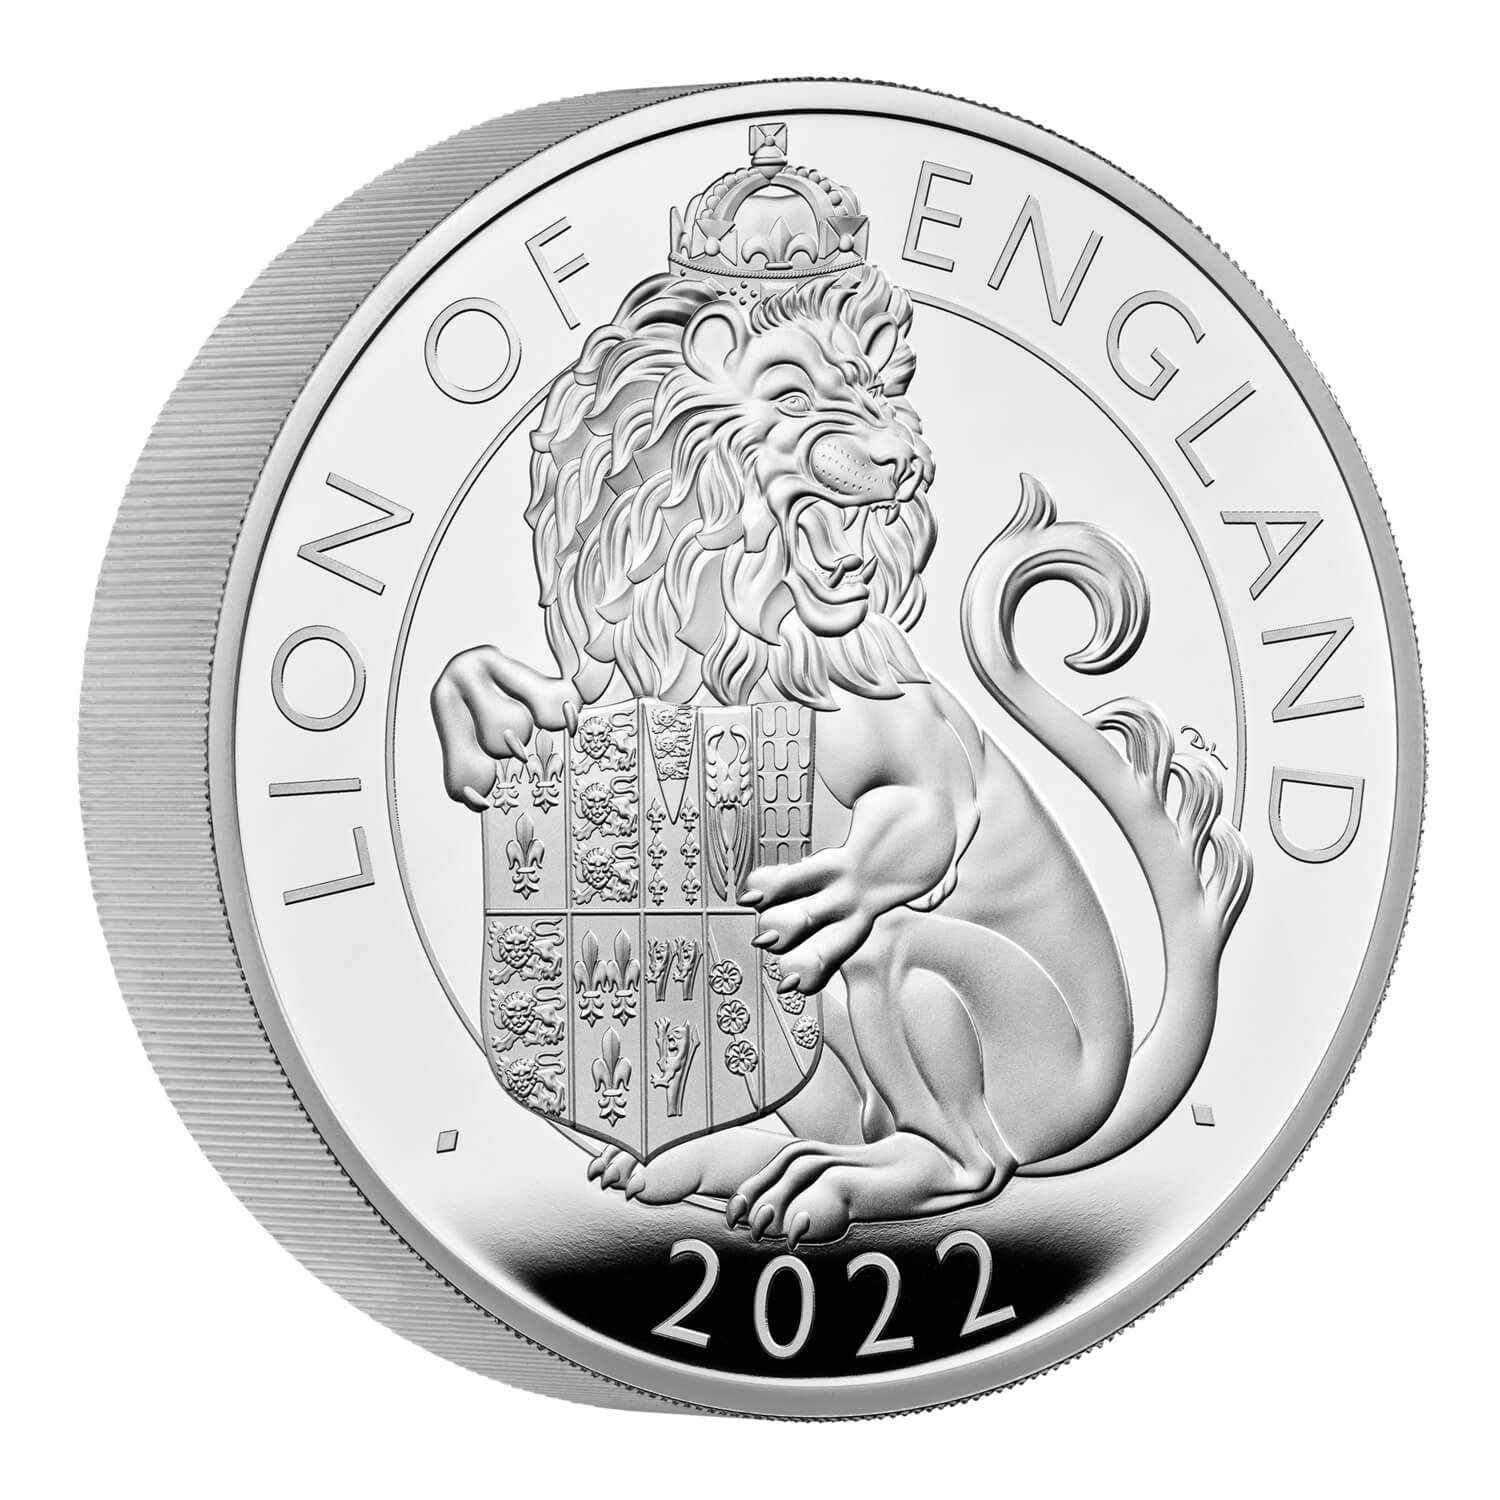 The Royal Tudor Beasts The Lion of England 2022 UK 10oz Silver Proof Coin